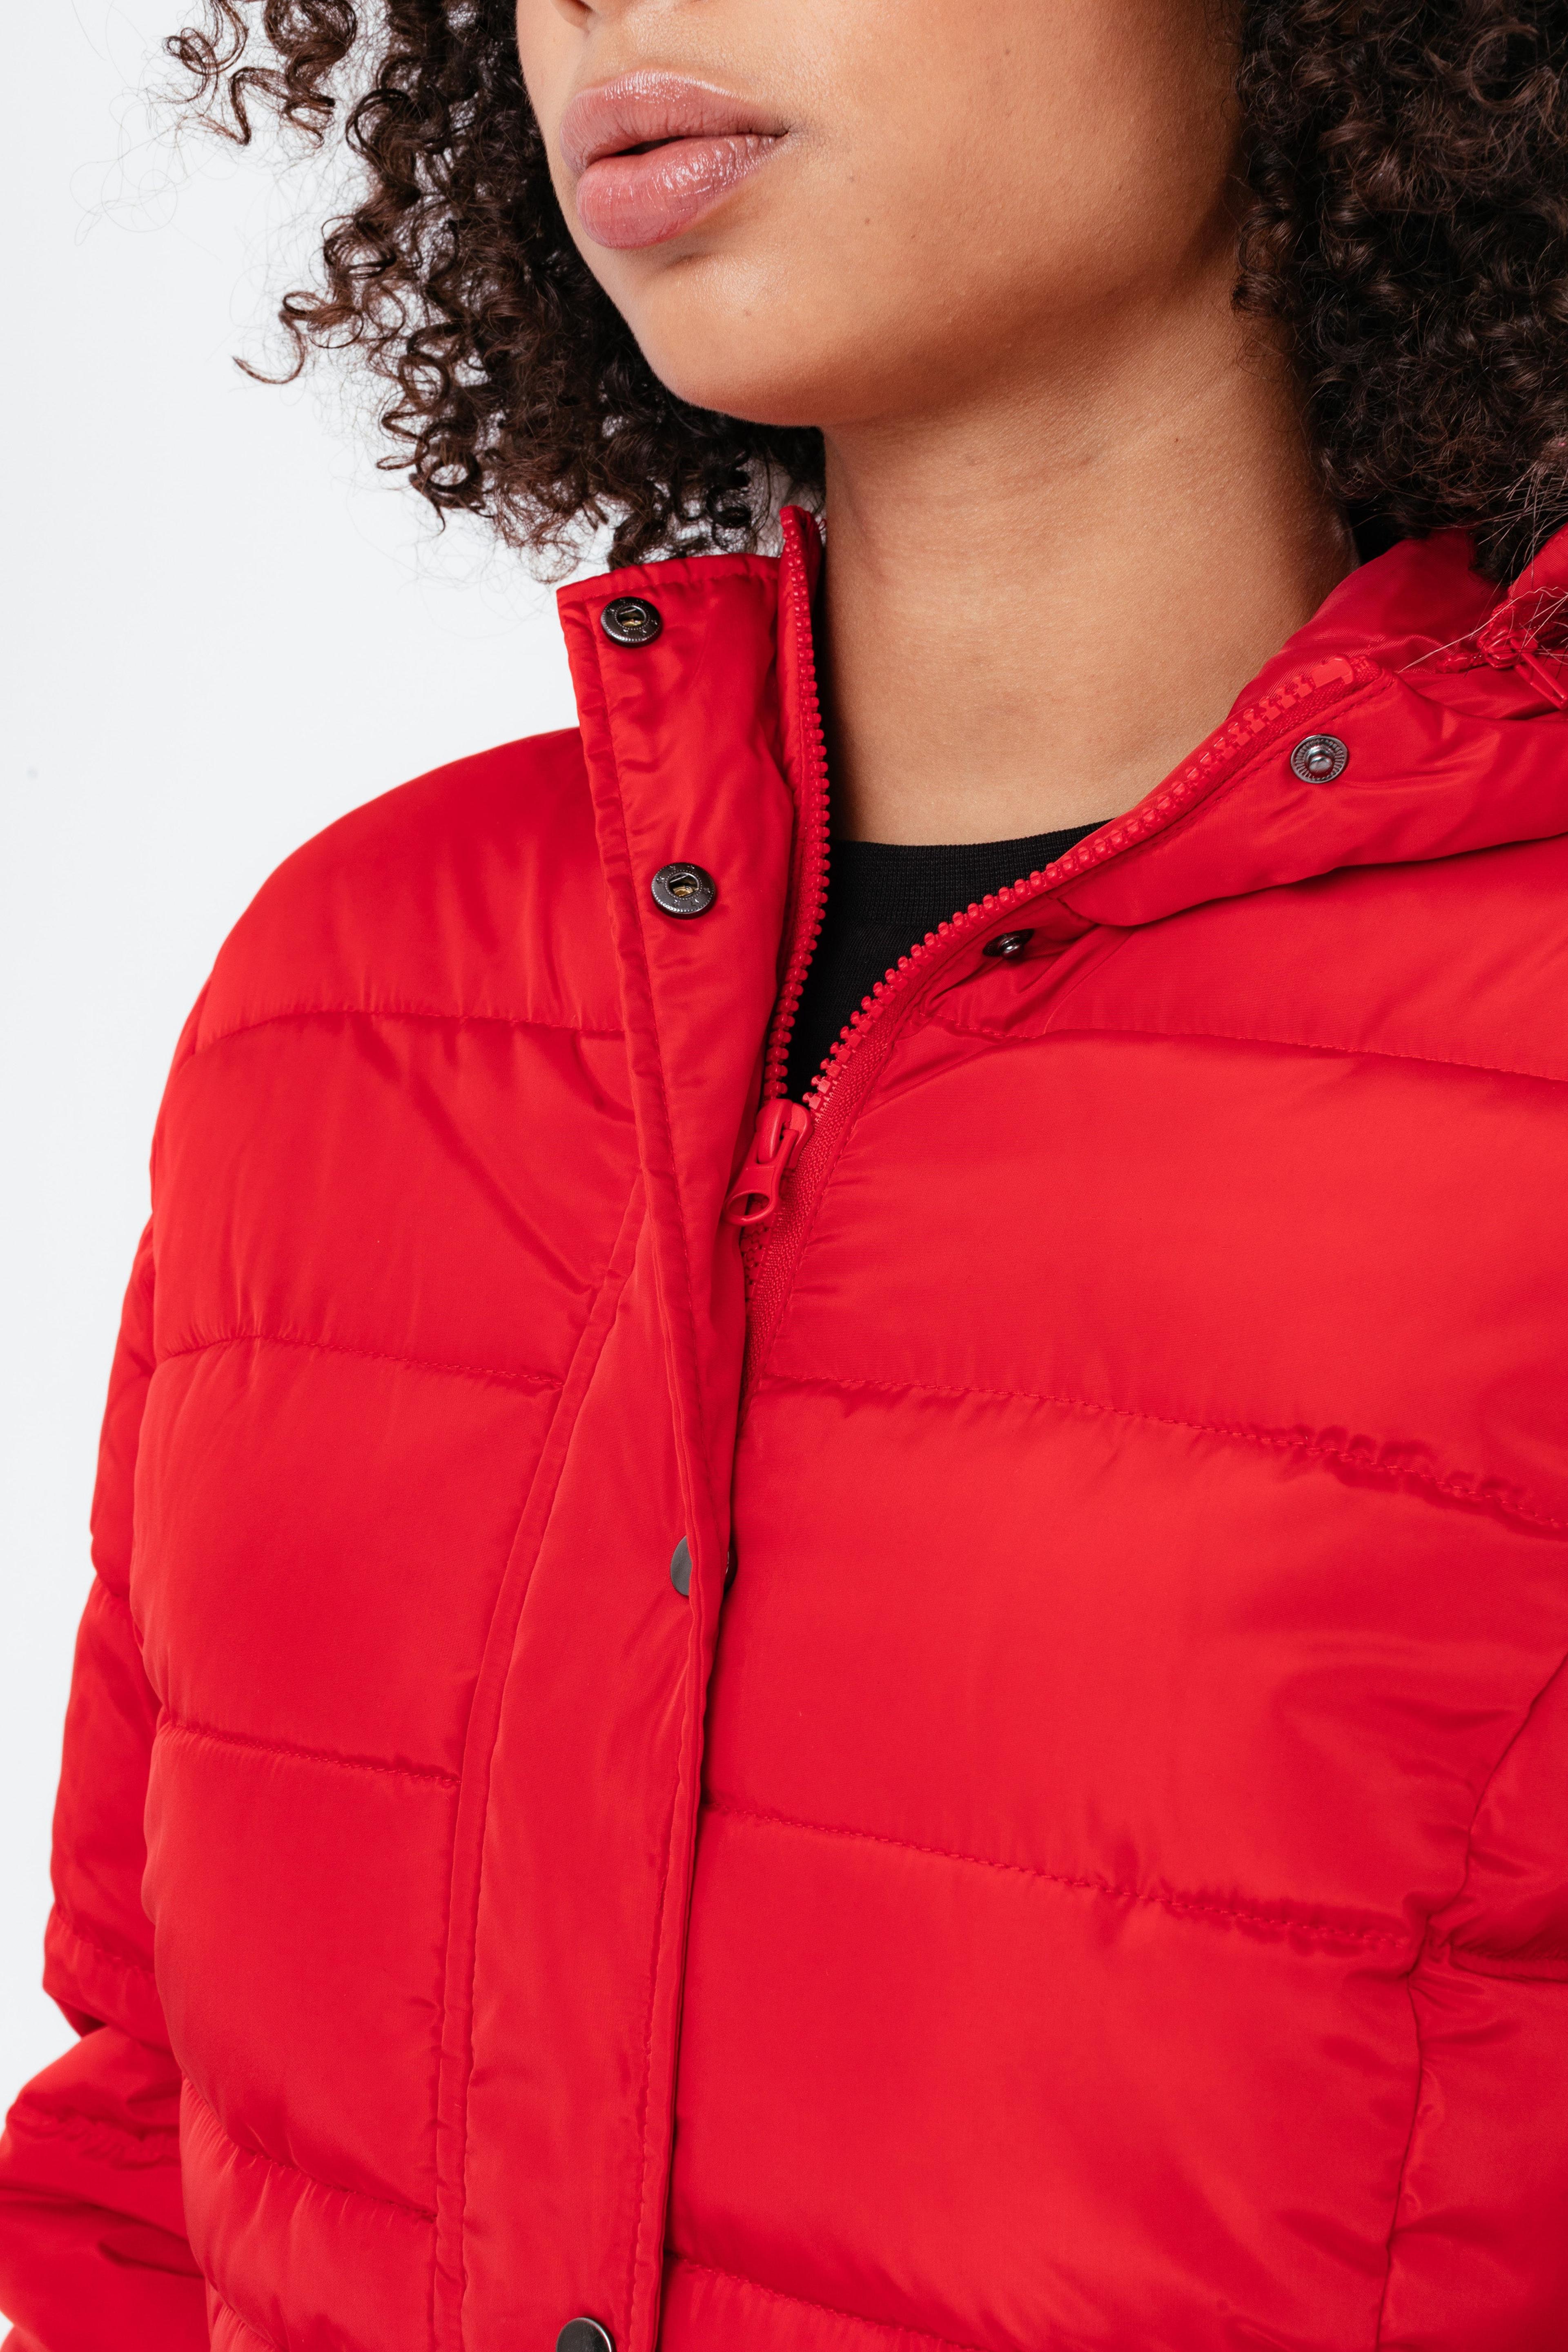 Alternate View 7 of HYPE RED SHORT LENGTH WOMEN'S PADDED COAT WITH FUR